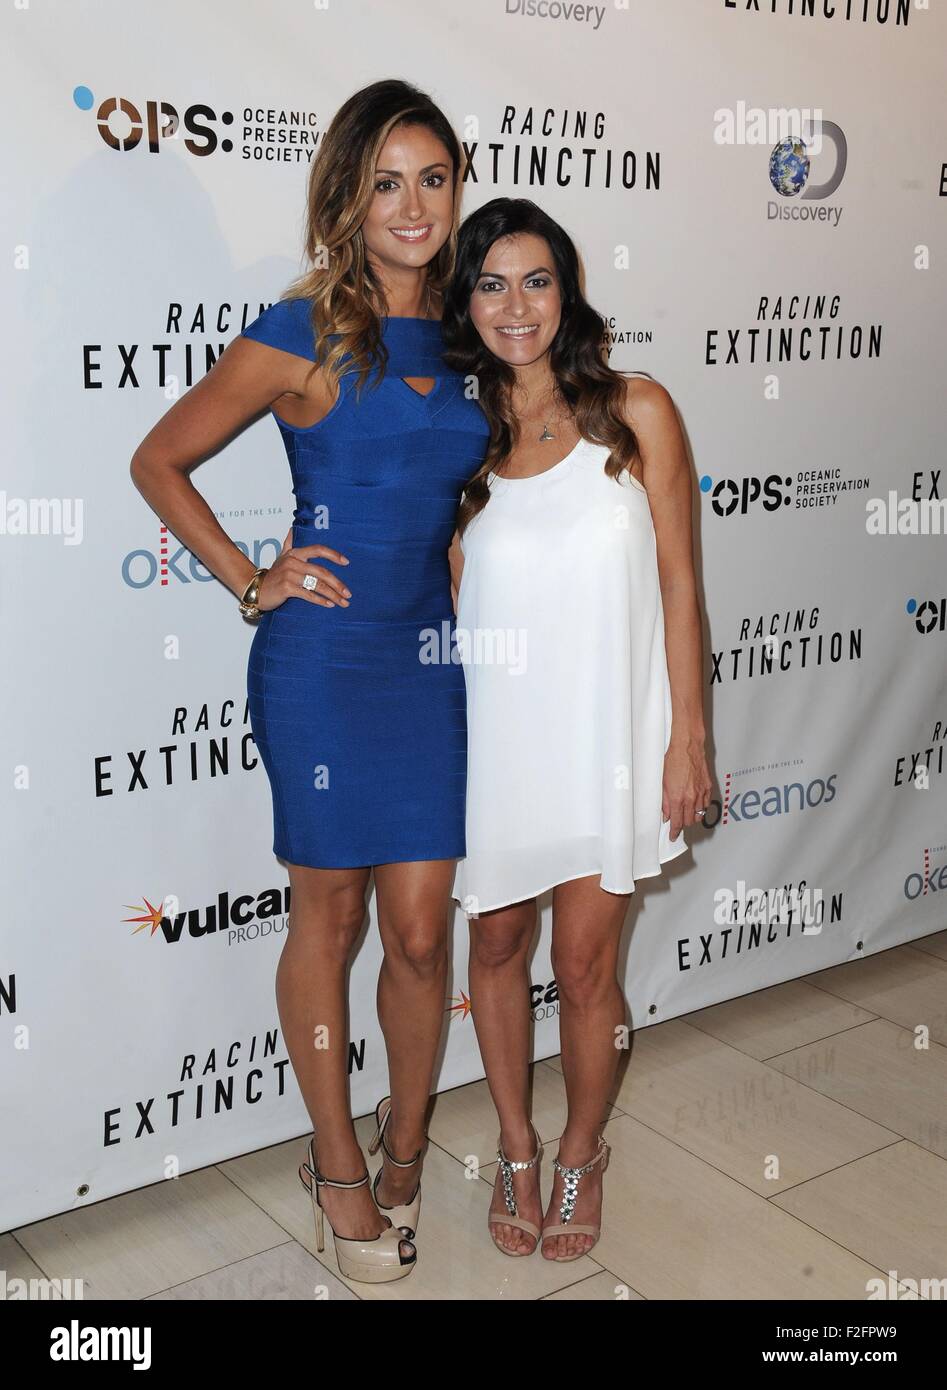 Los Angeles, CA, USA. 17th Sep, 2015. Katie Cleary, Leilani Munter at arrivals for RACING EXTINCTION Premiere, The London West Hollywood, Los Angeles, CA September 17, 2015. Credit:  Dee Cercone/Everett Collection/Alamy Live News Stock Photo